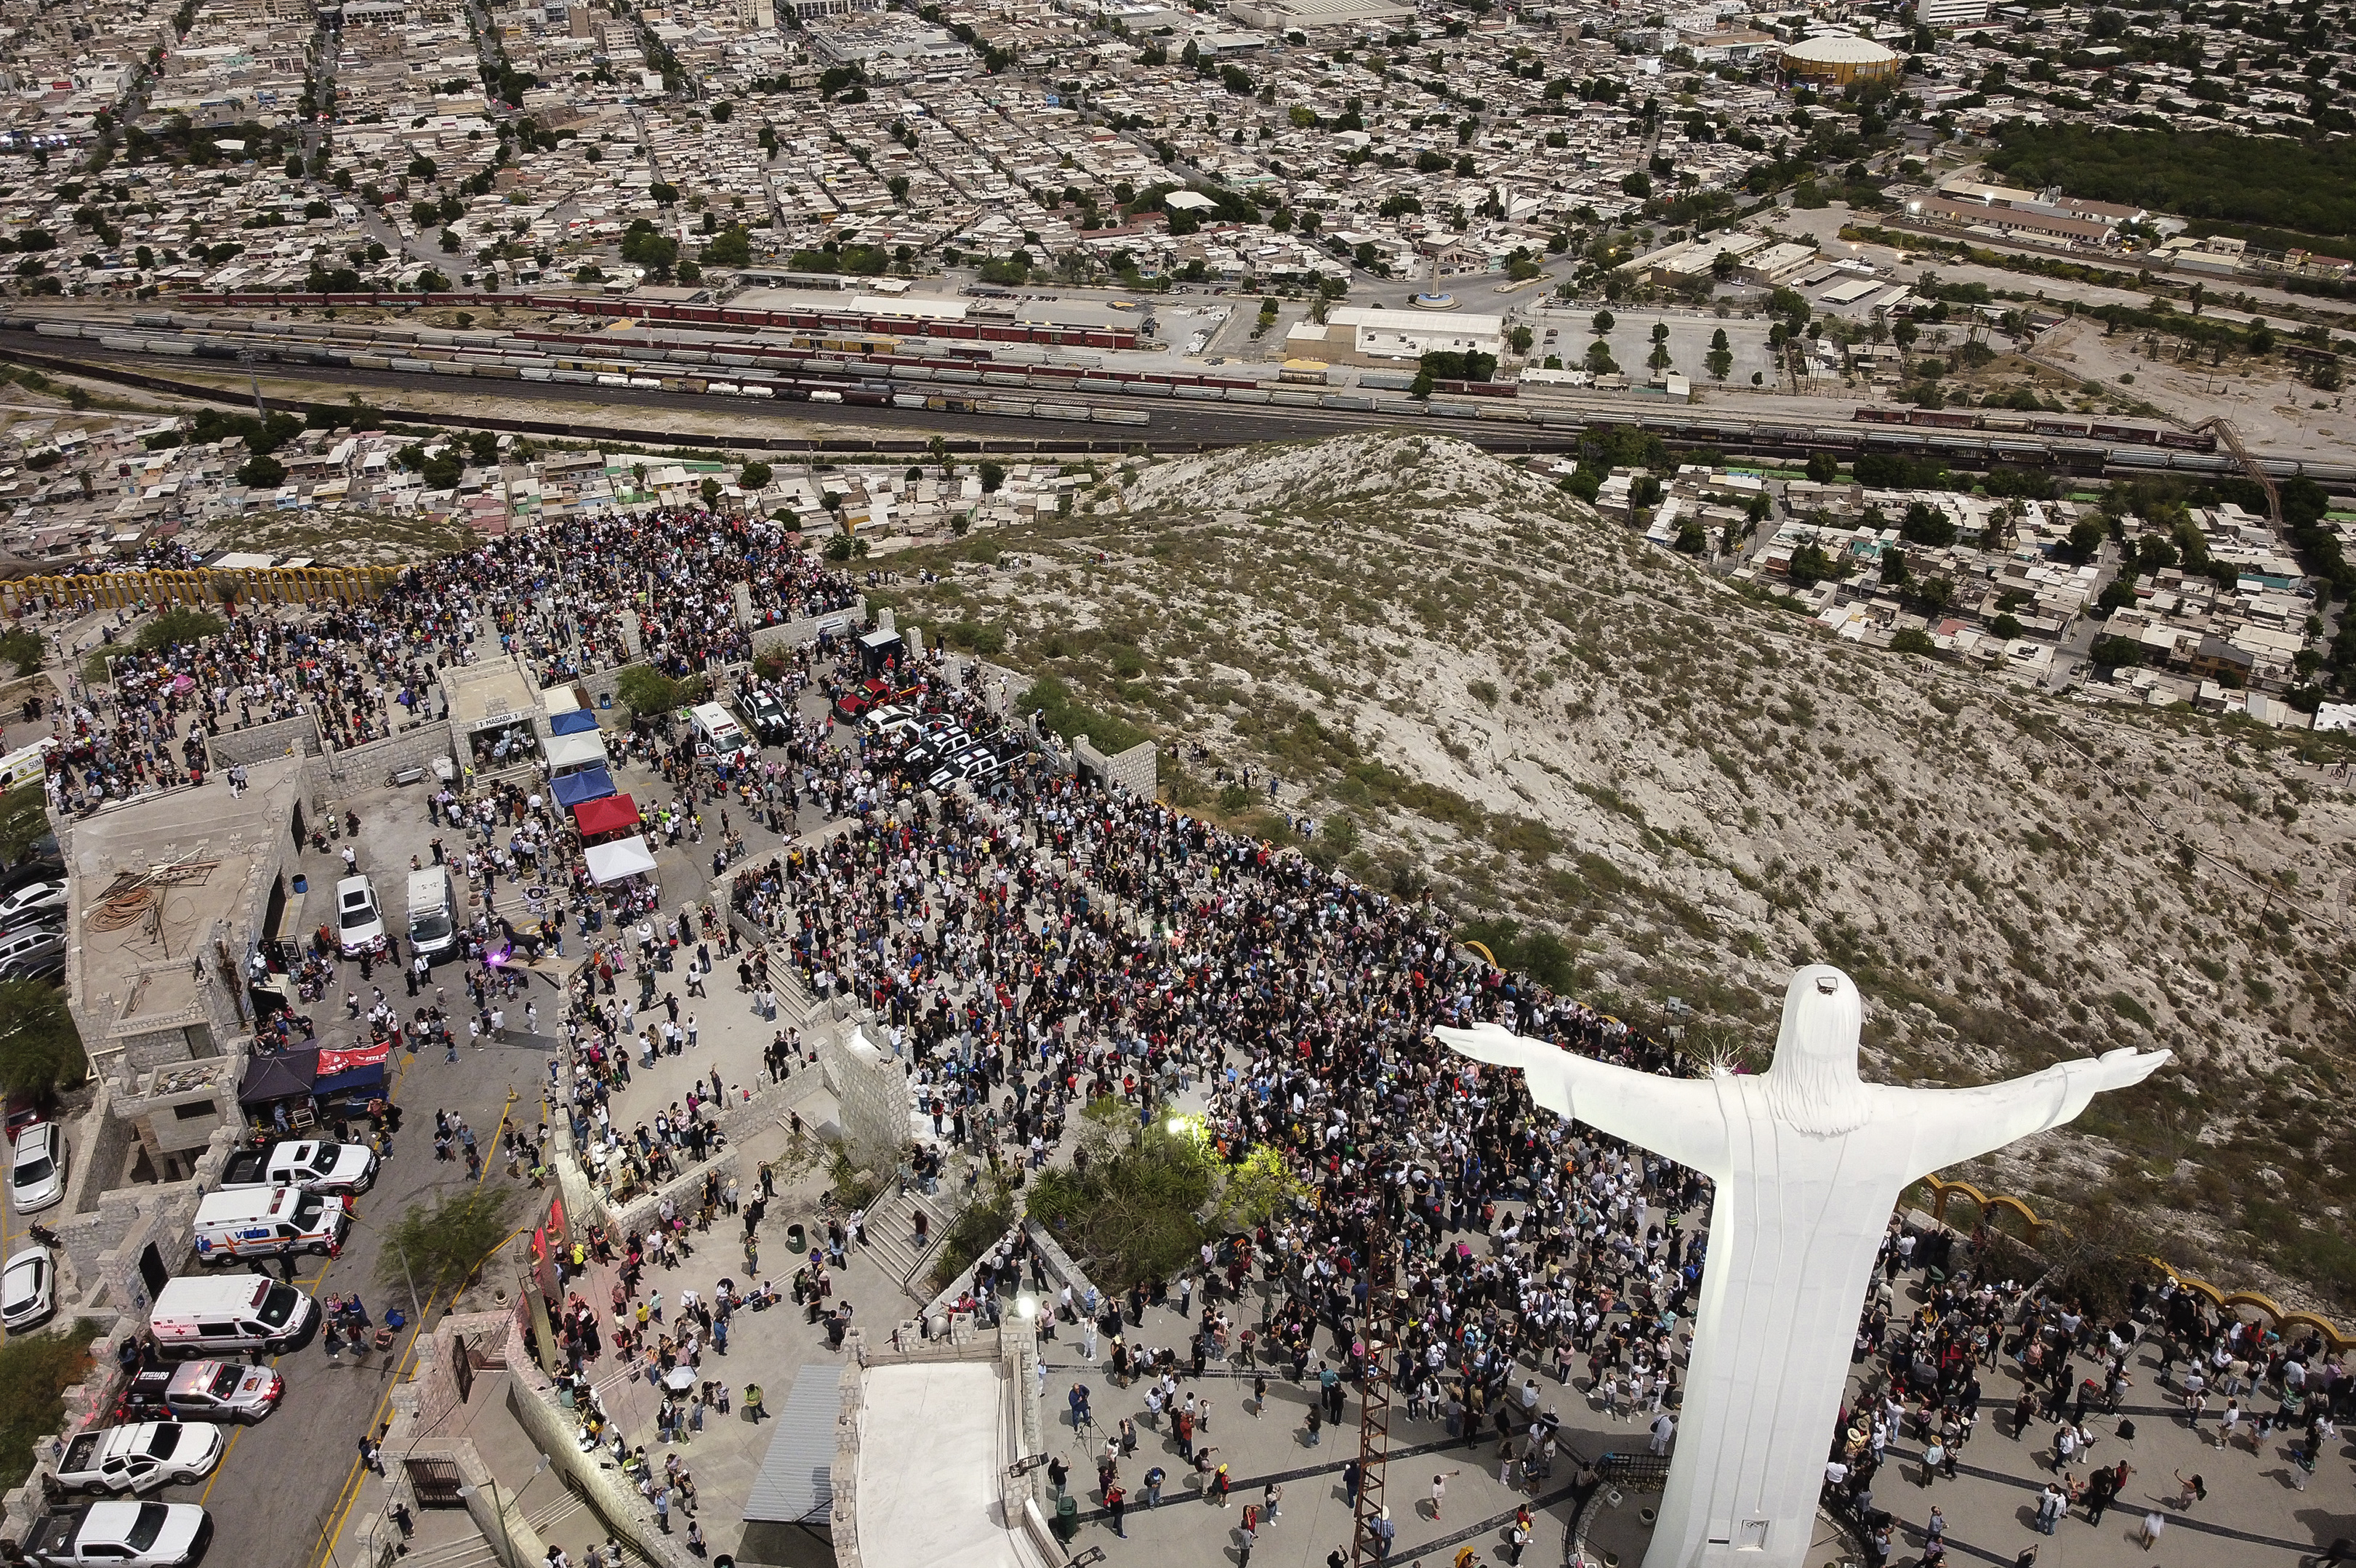 Aerial view of a large crowd gathered around a statue of Jesus with outstretched arms on a hilltop